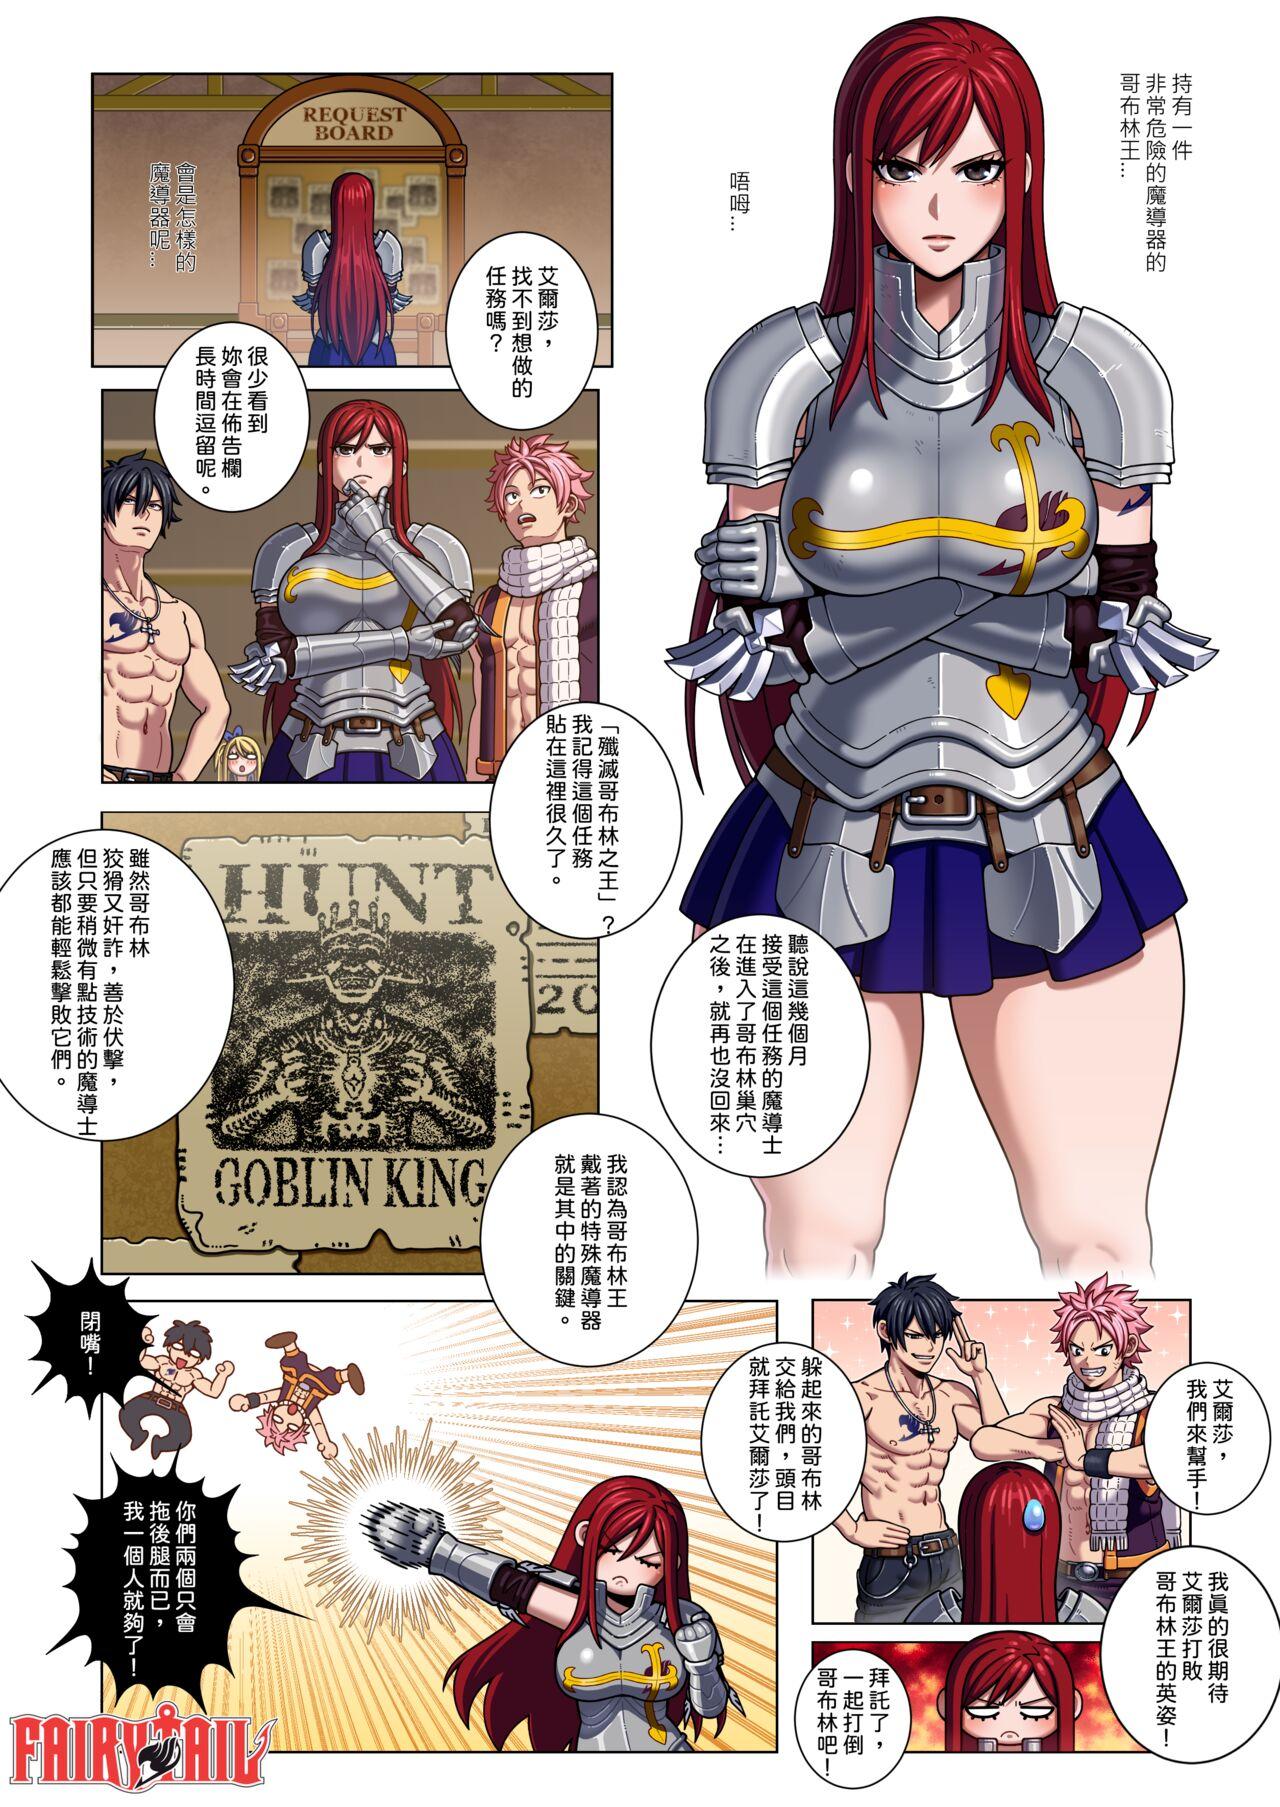 Firsttime Erza Scarlet 艾爾莎·史卡雷特 - Fairy tail Long - Page 1